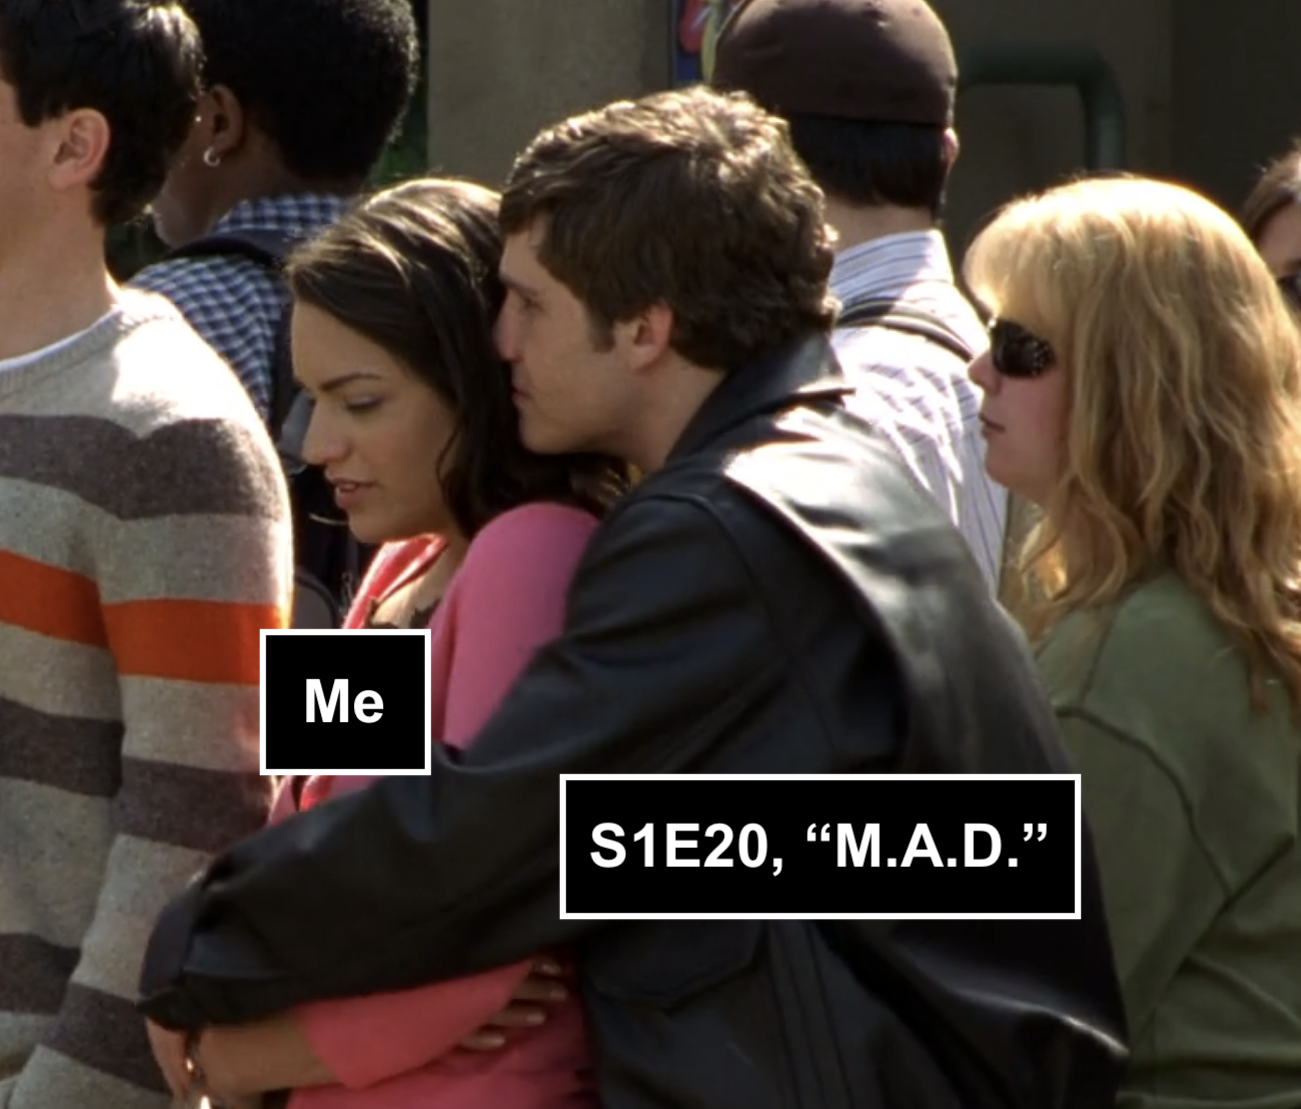 Screenshot from S1E20 of Veronica Mars. Tad, a white guy with brown hair and a leather jacket is holding Carmen, a young Latina woman in a pink swear, from behind. He's holding her snug and has his head burrowed in her hair, and she looks somehwat uncomfortable.